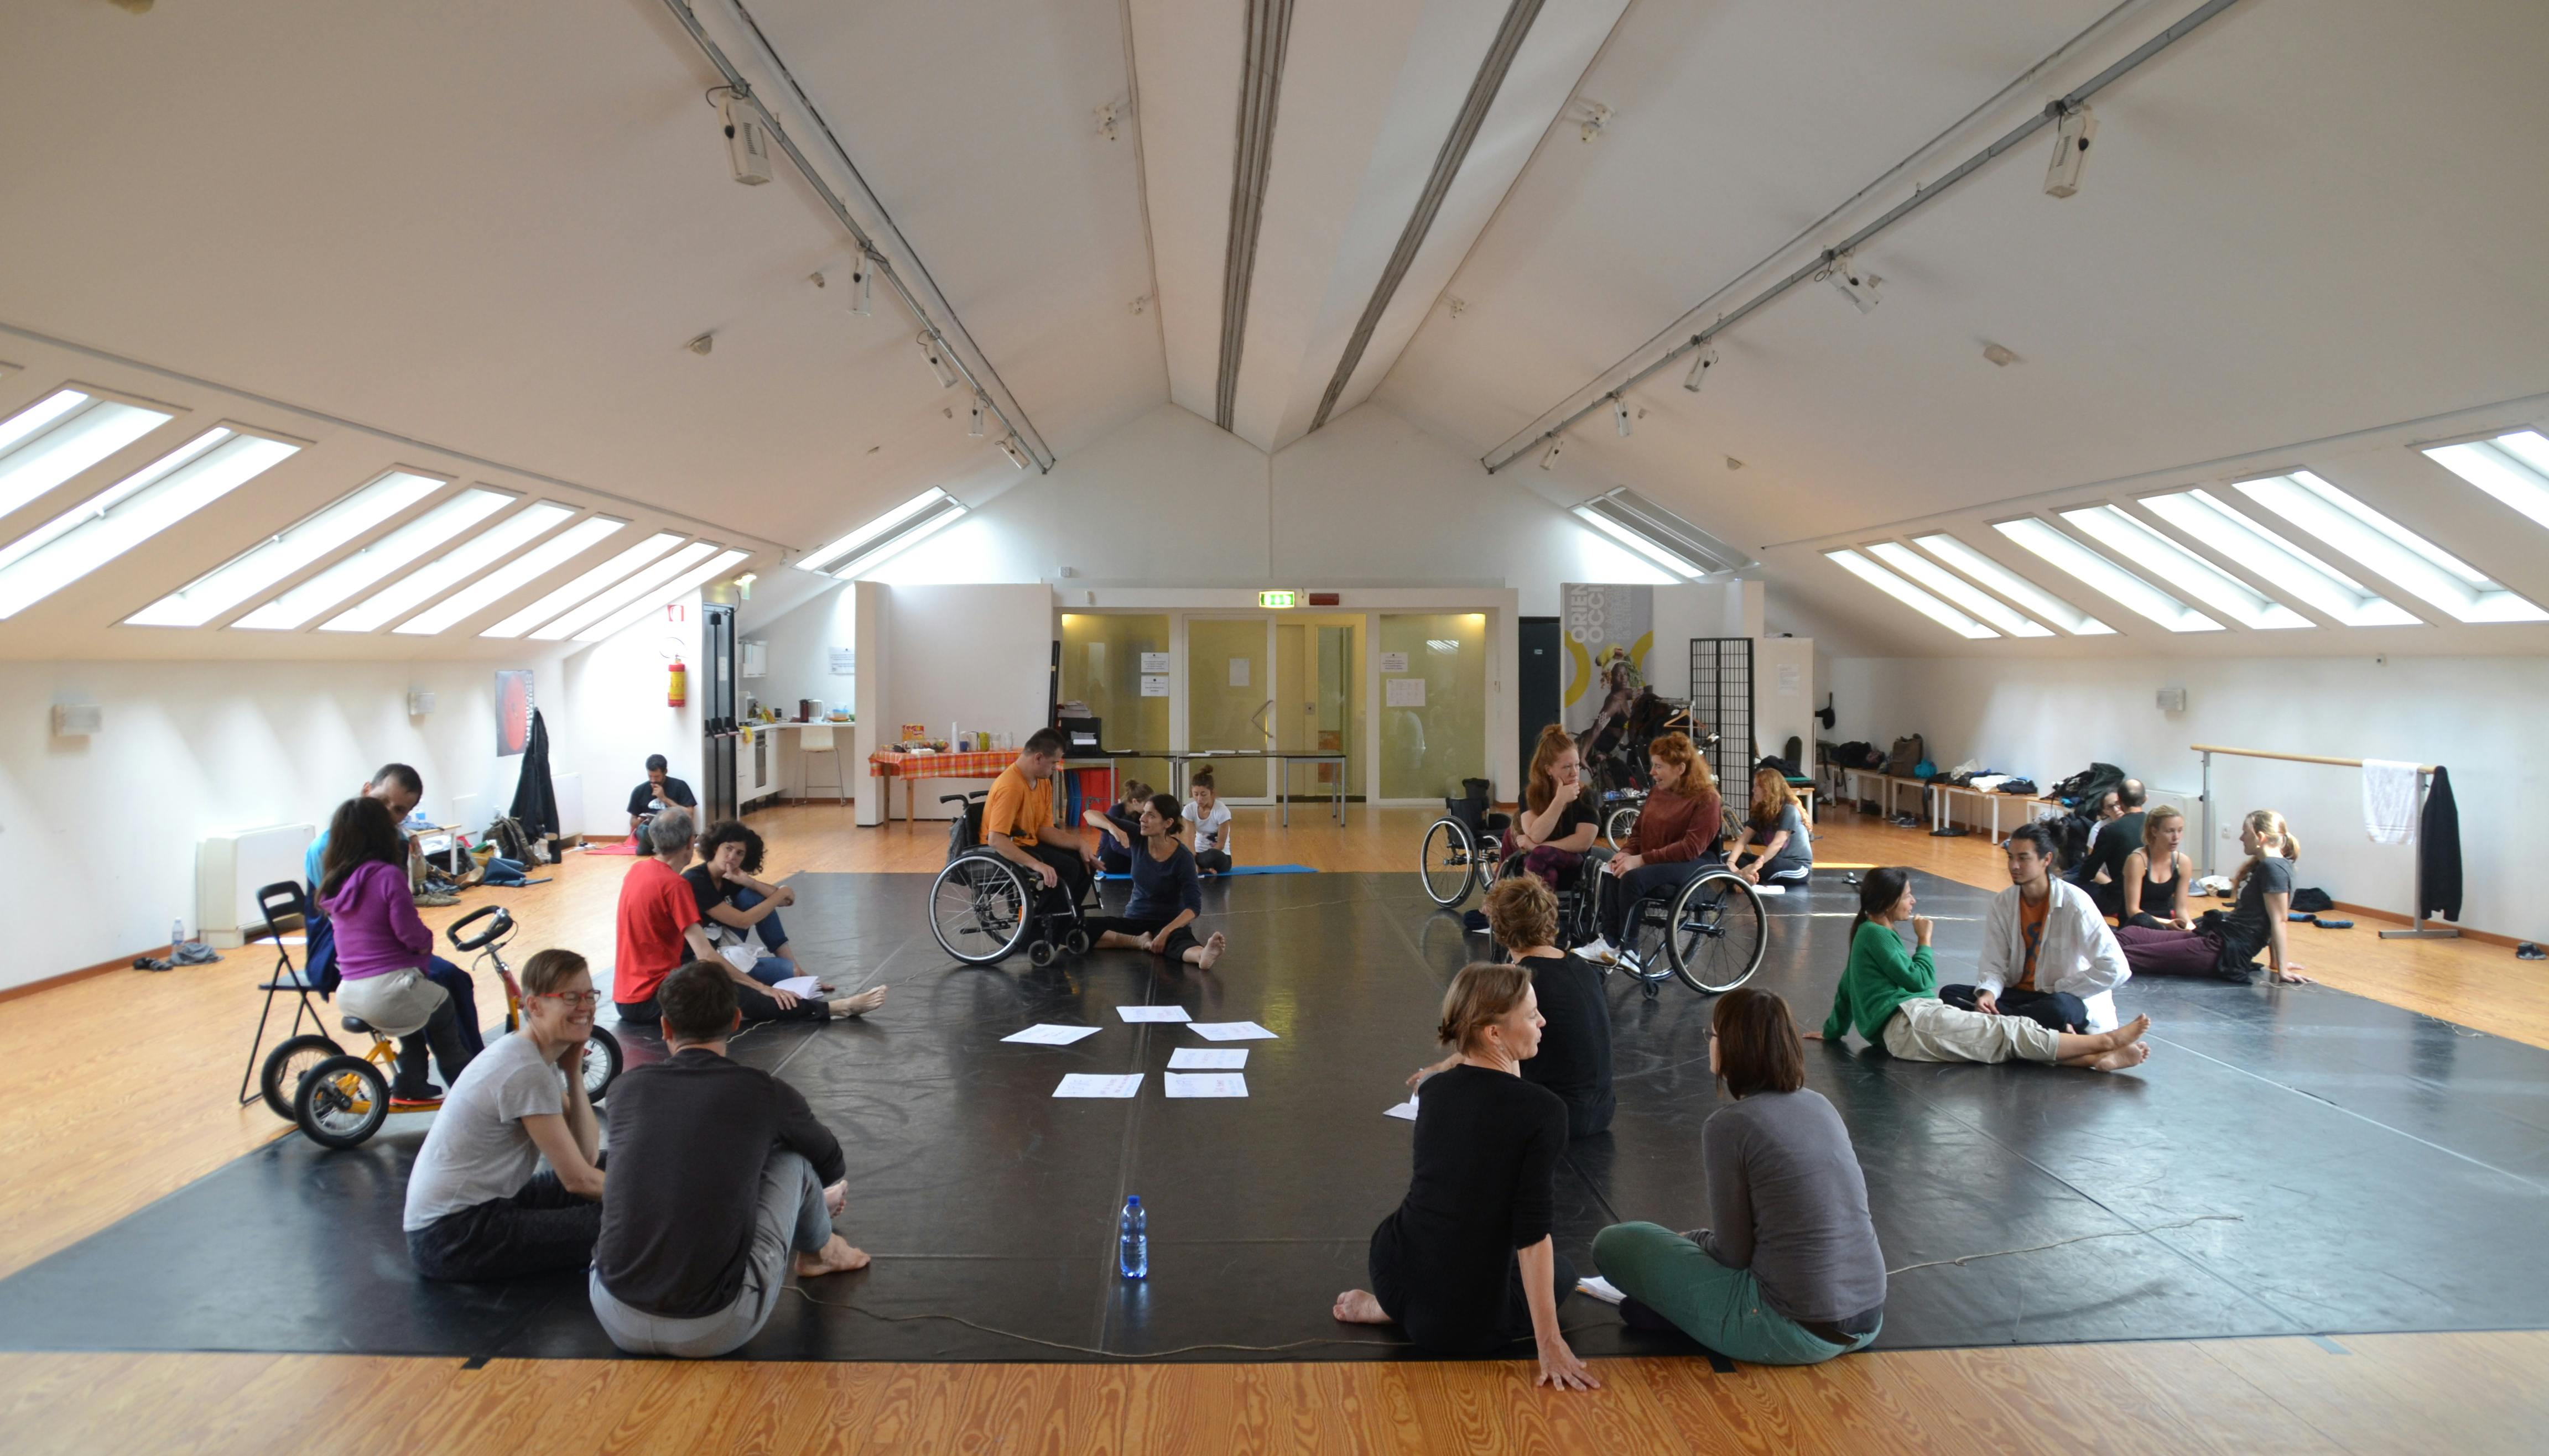 A group of people with and without disabilities discuss in pairs in the Studio of Oriente Occidente during a workshop.